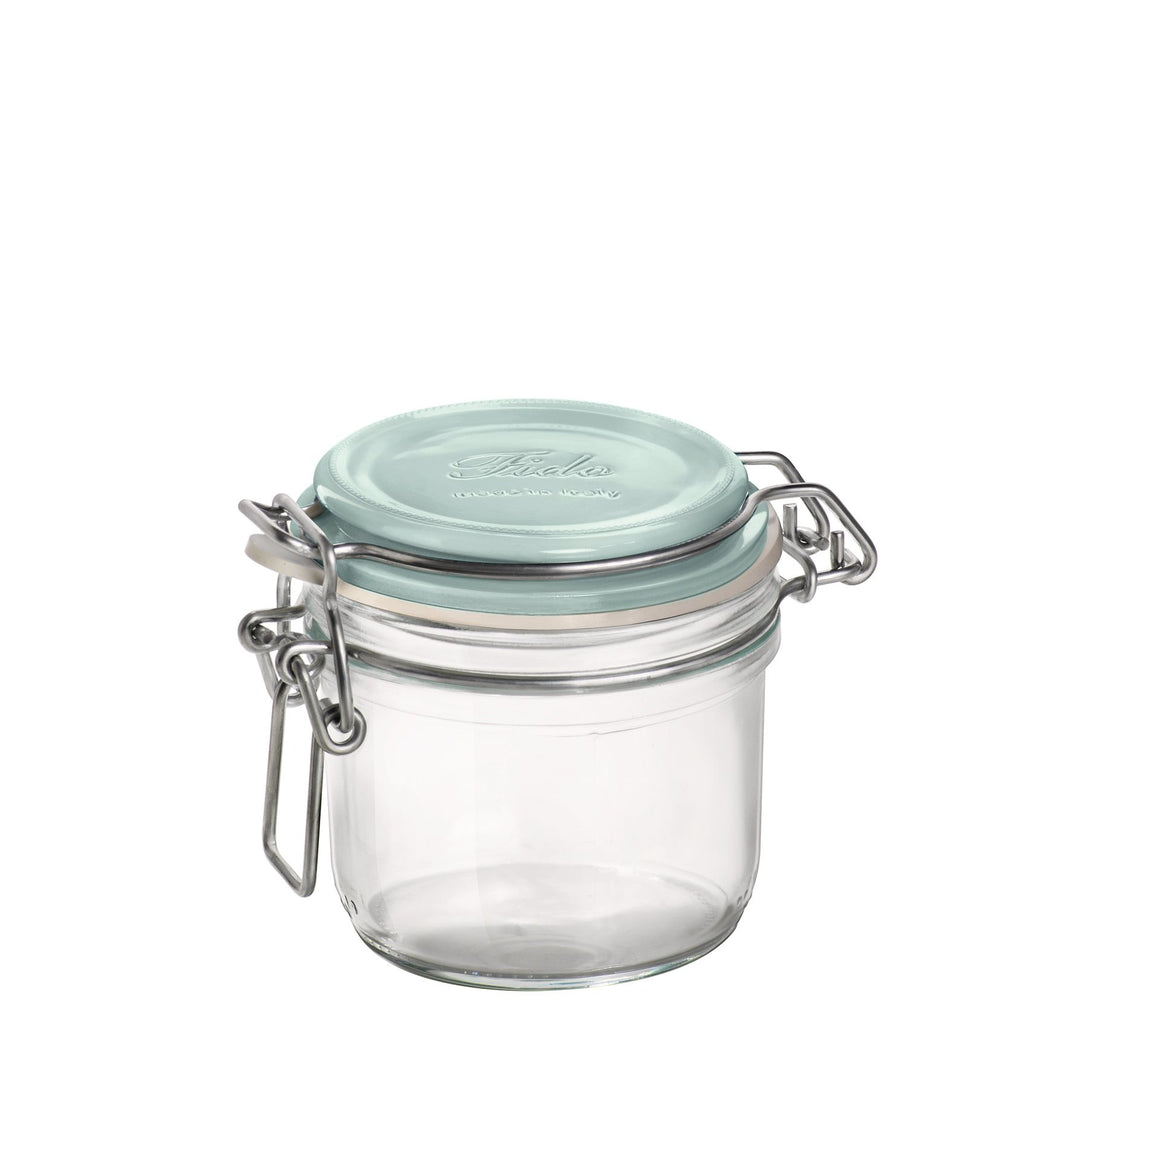 Fido Jar - 6.75oz - Clear with Colored Top